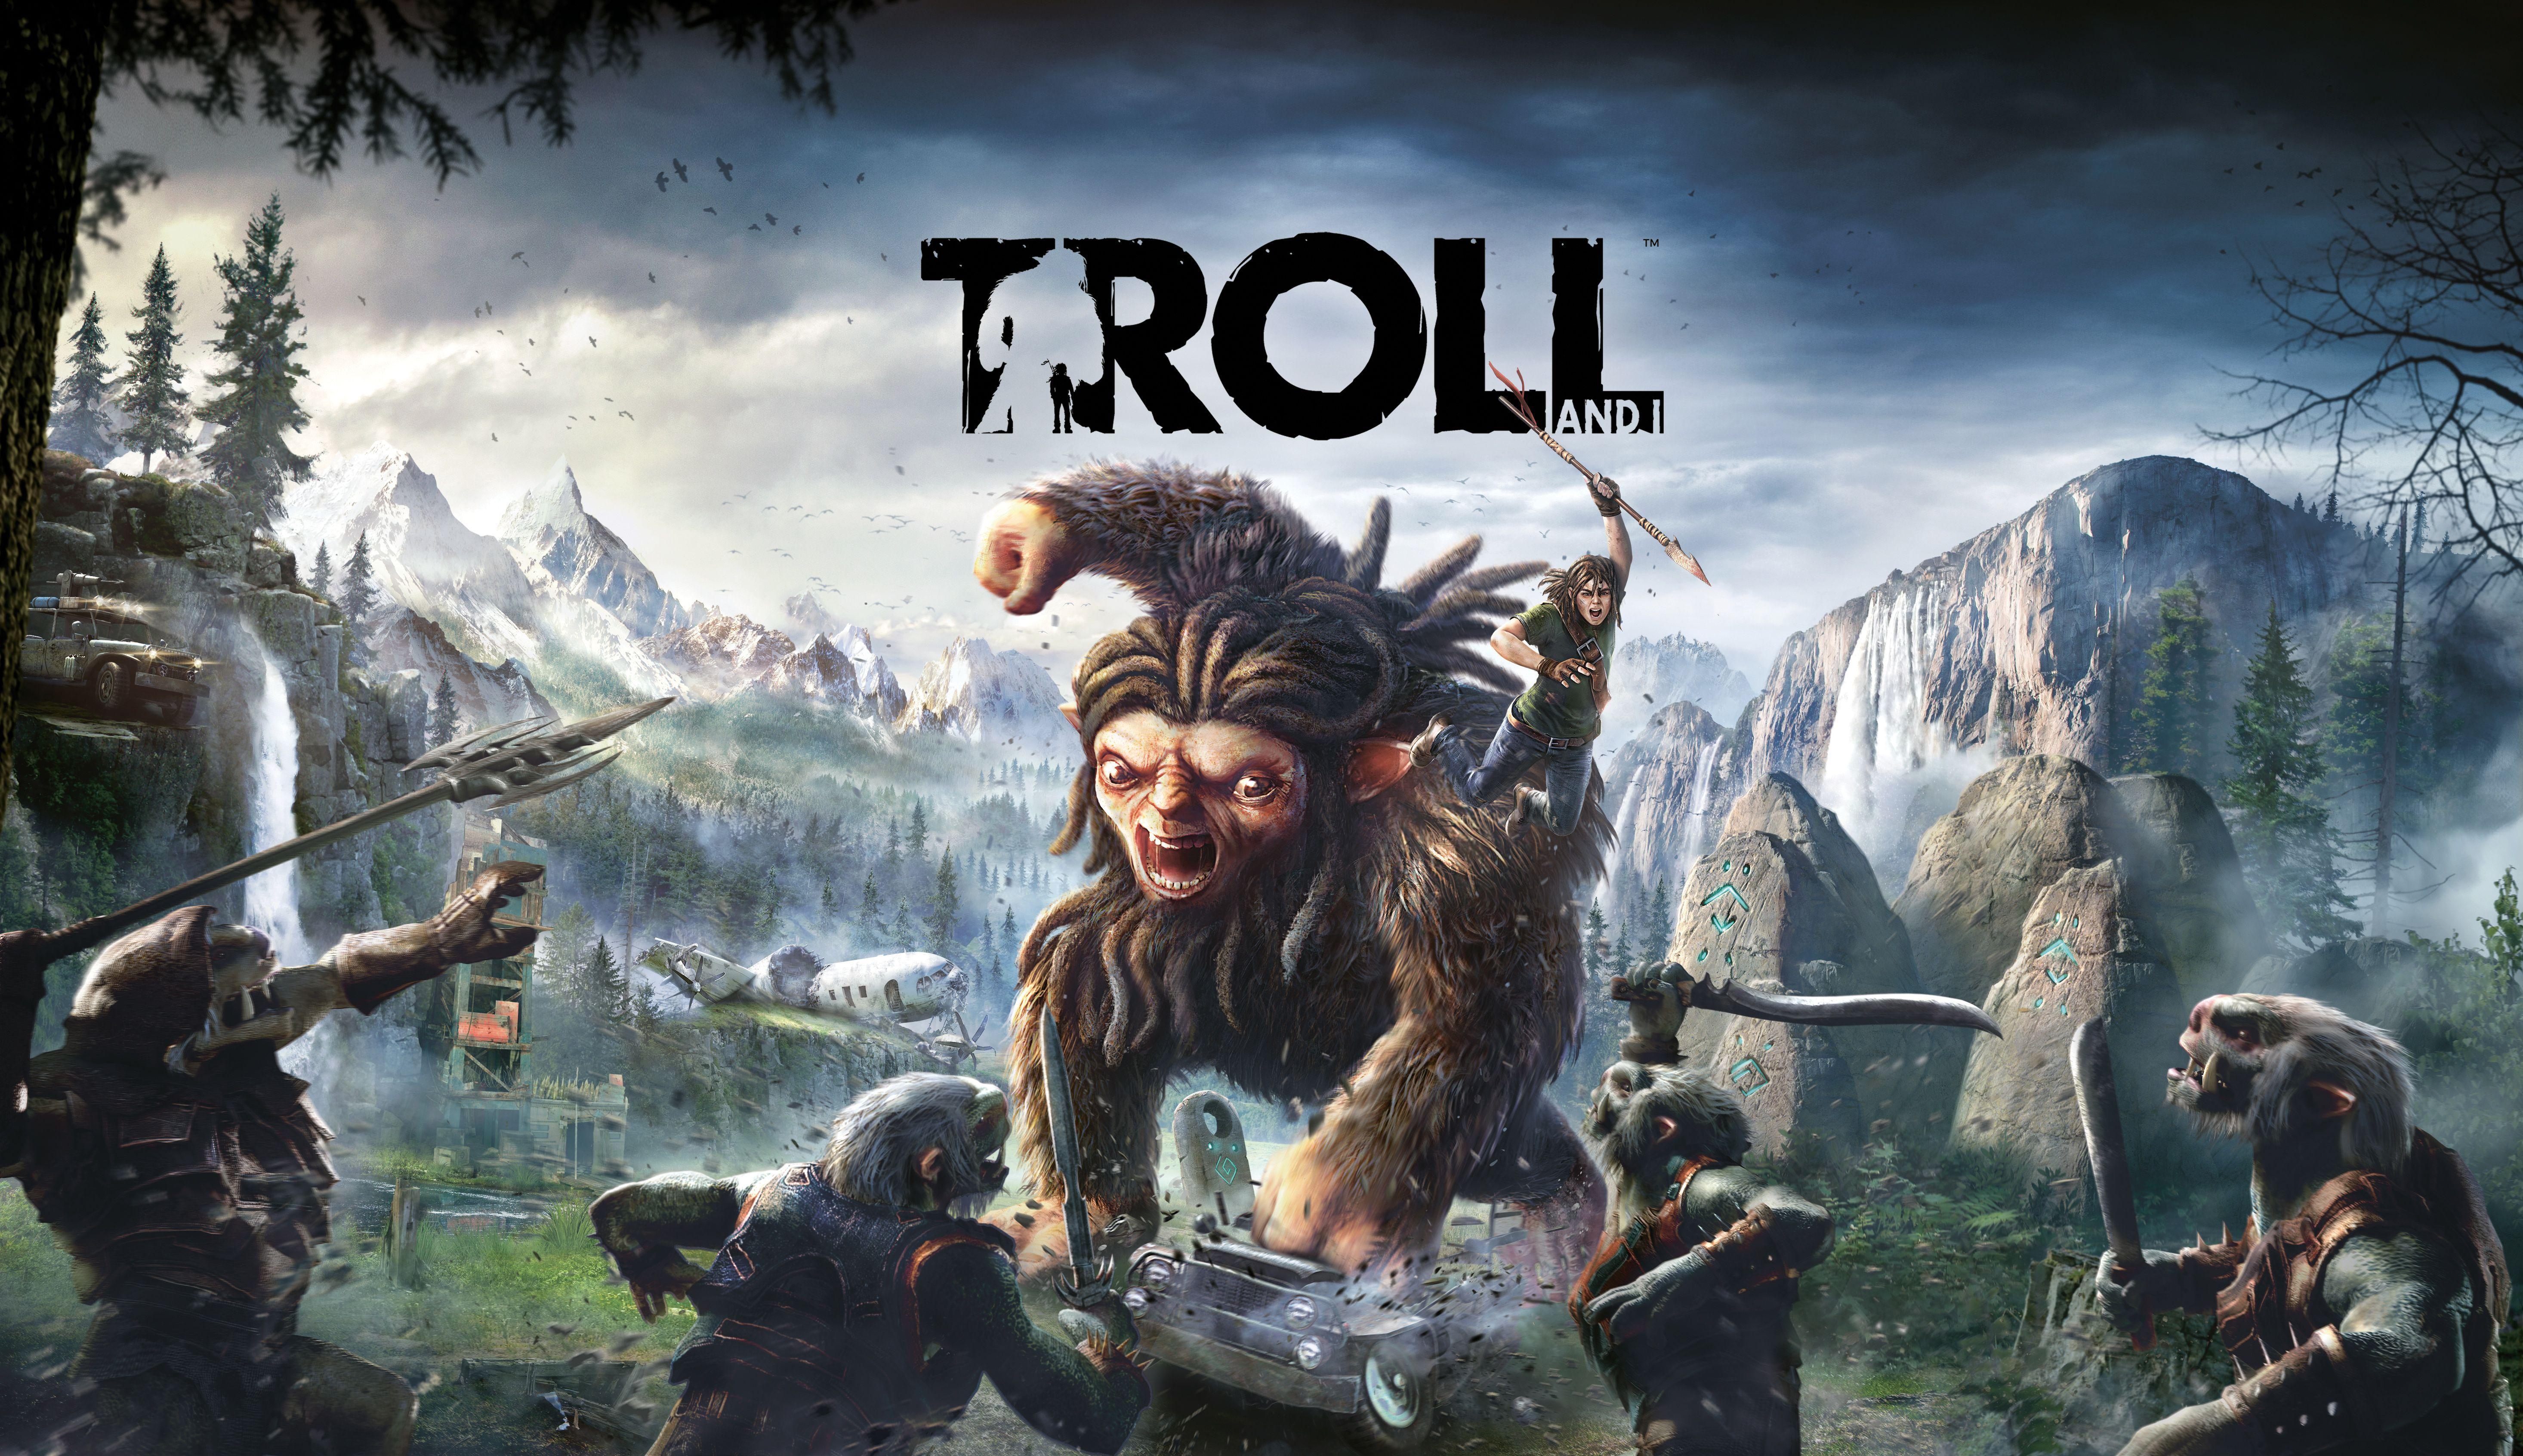 Wallpaper Troll and I, PS Xbox One, PC, HD, Games